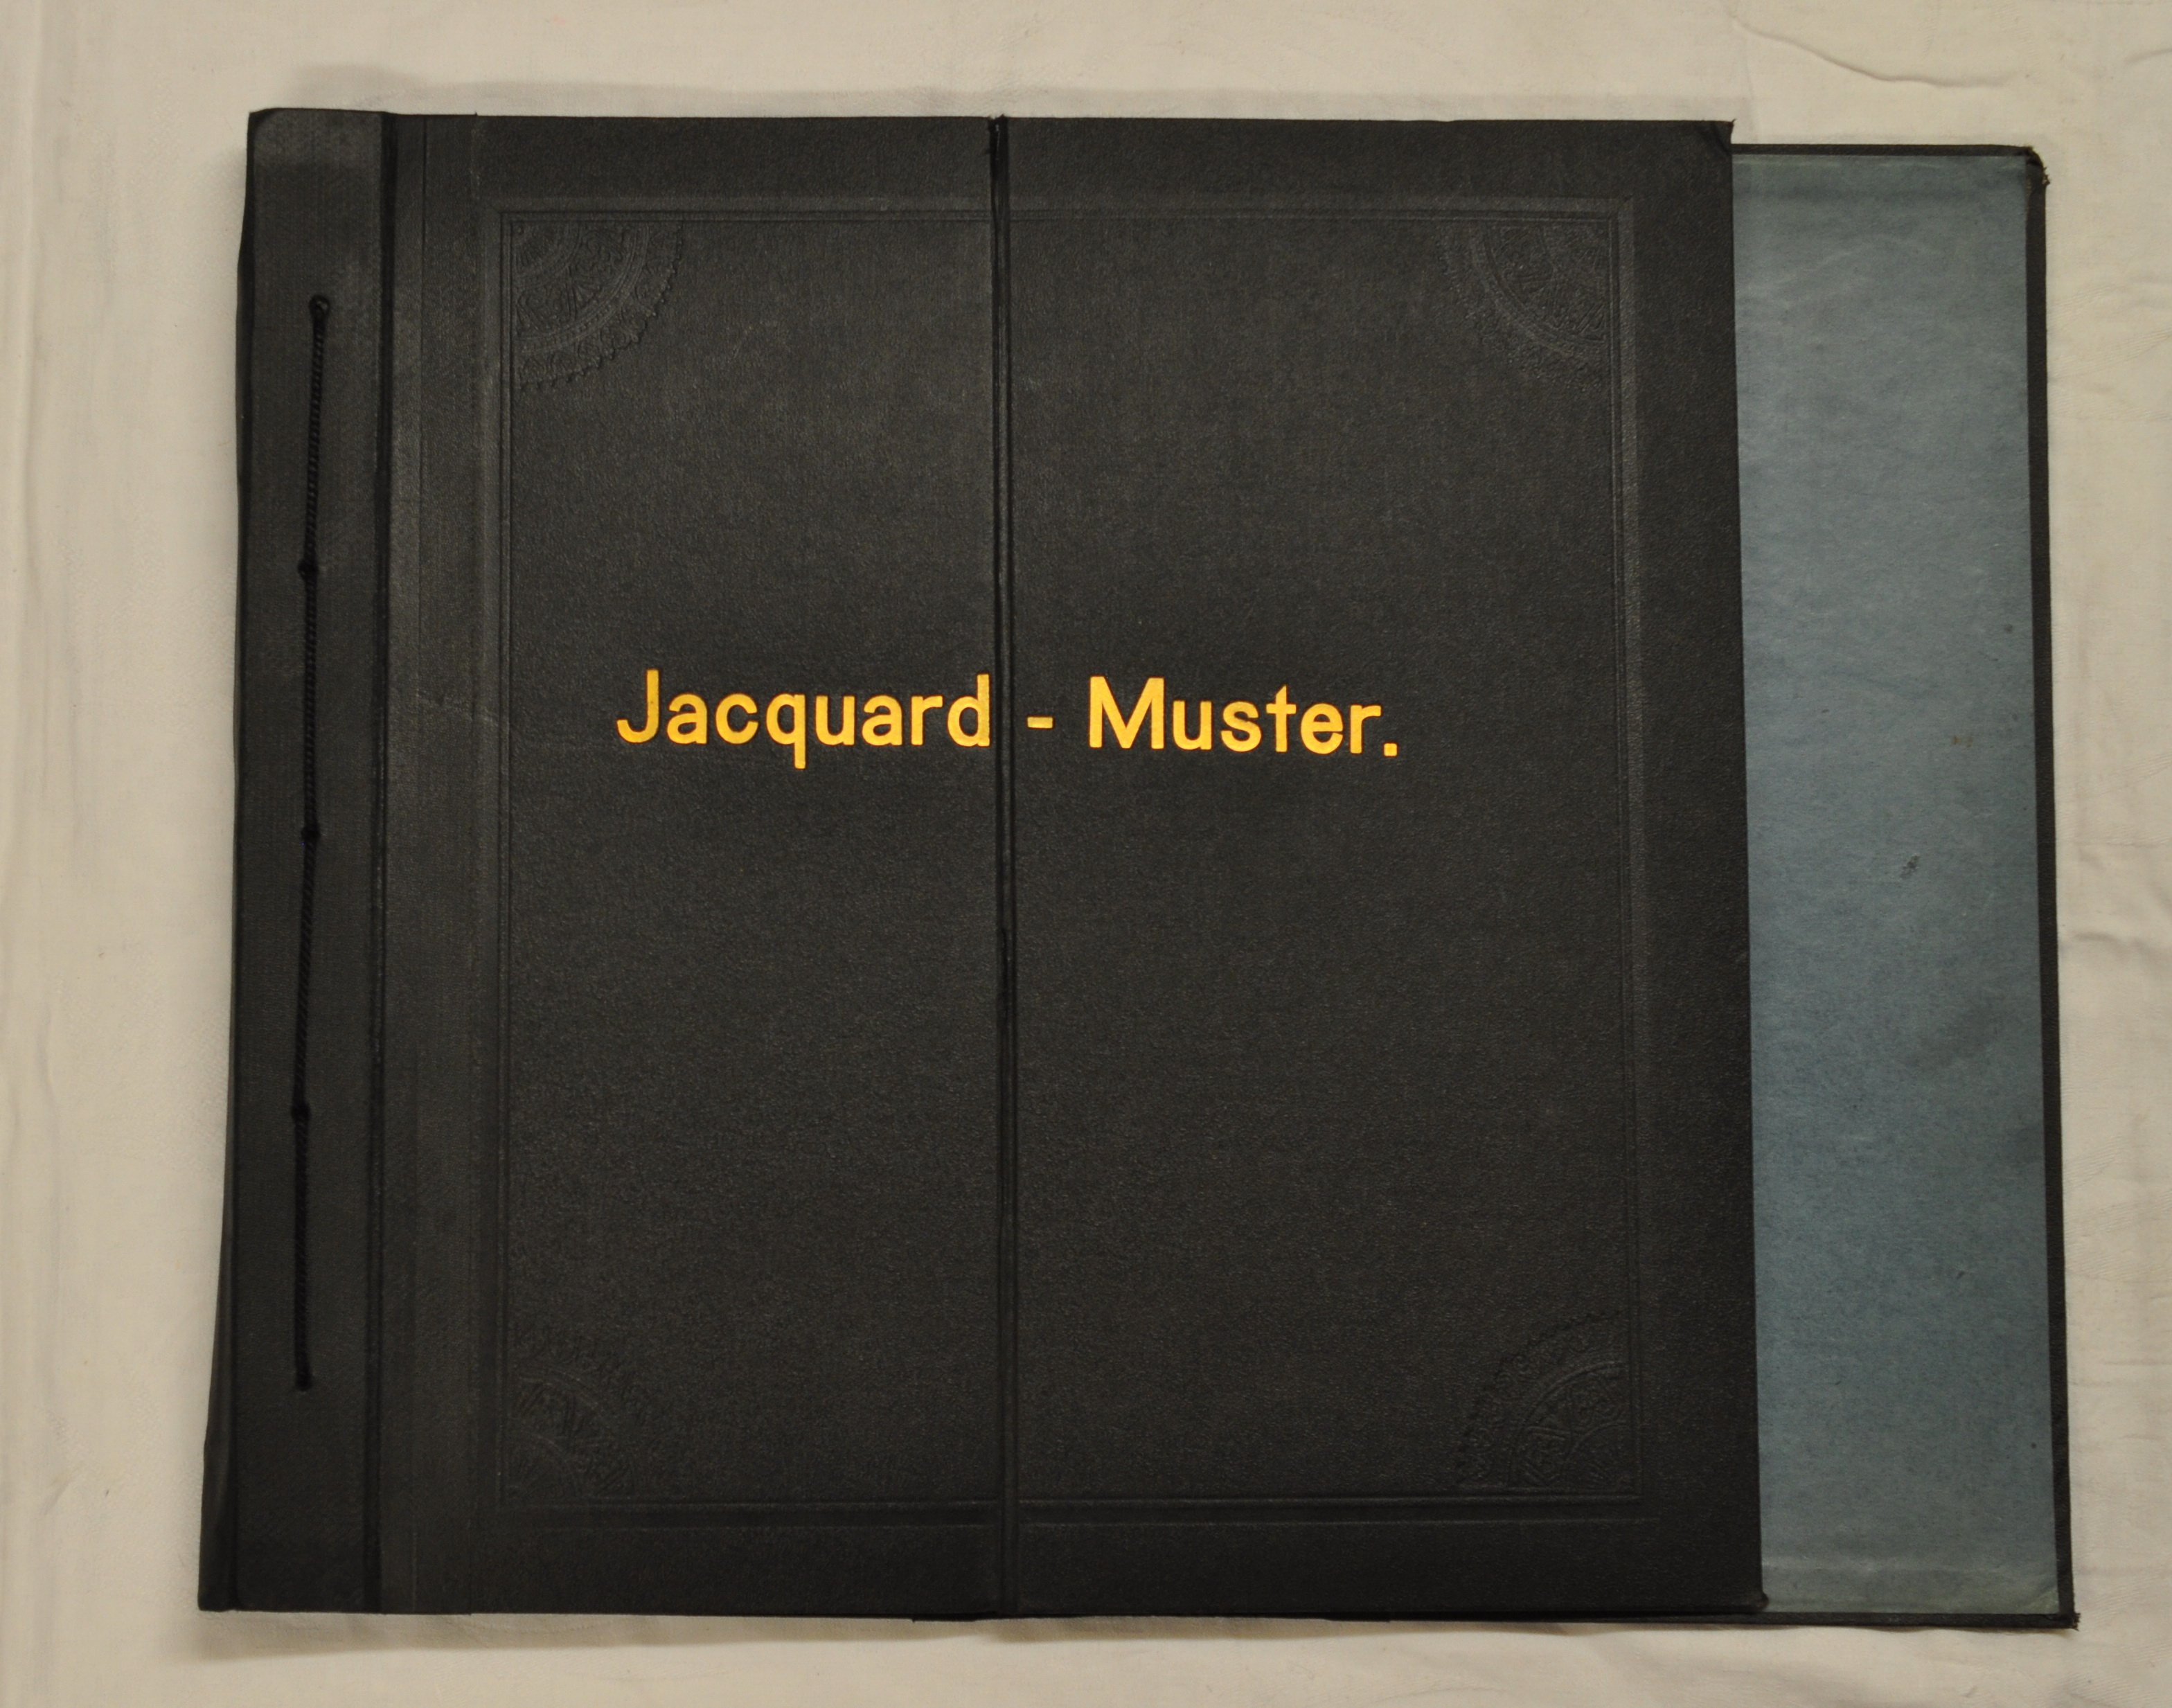 Musterbuch "Jacquard-Muster" (Deutsches Damast- und Frottiermuseum CC BY-NC-SA)